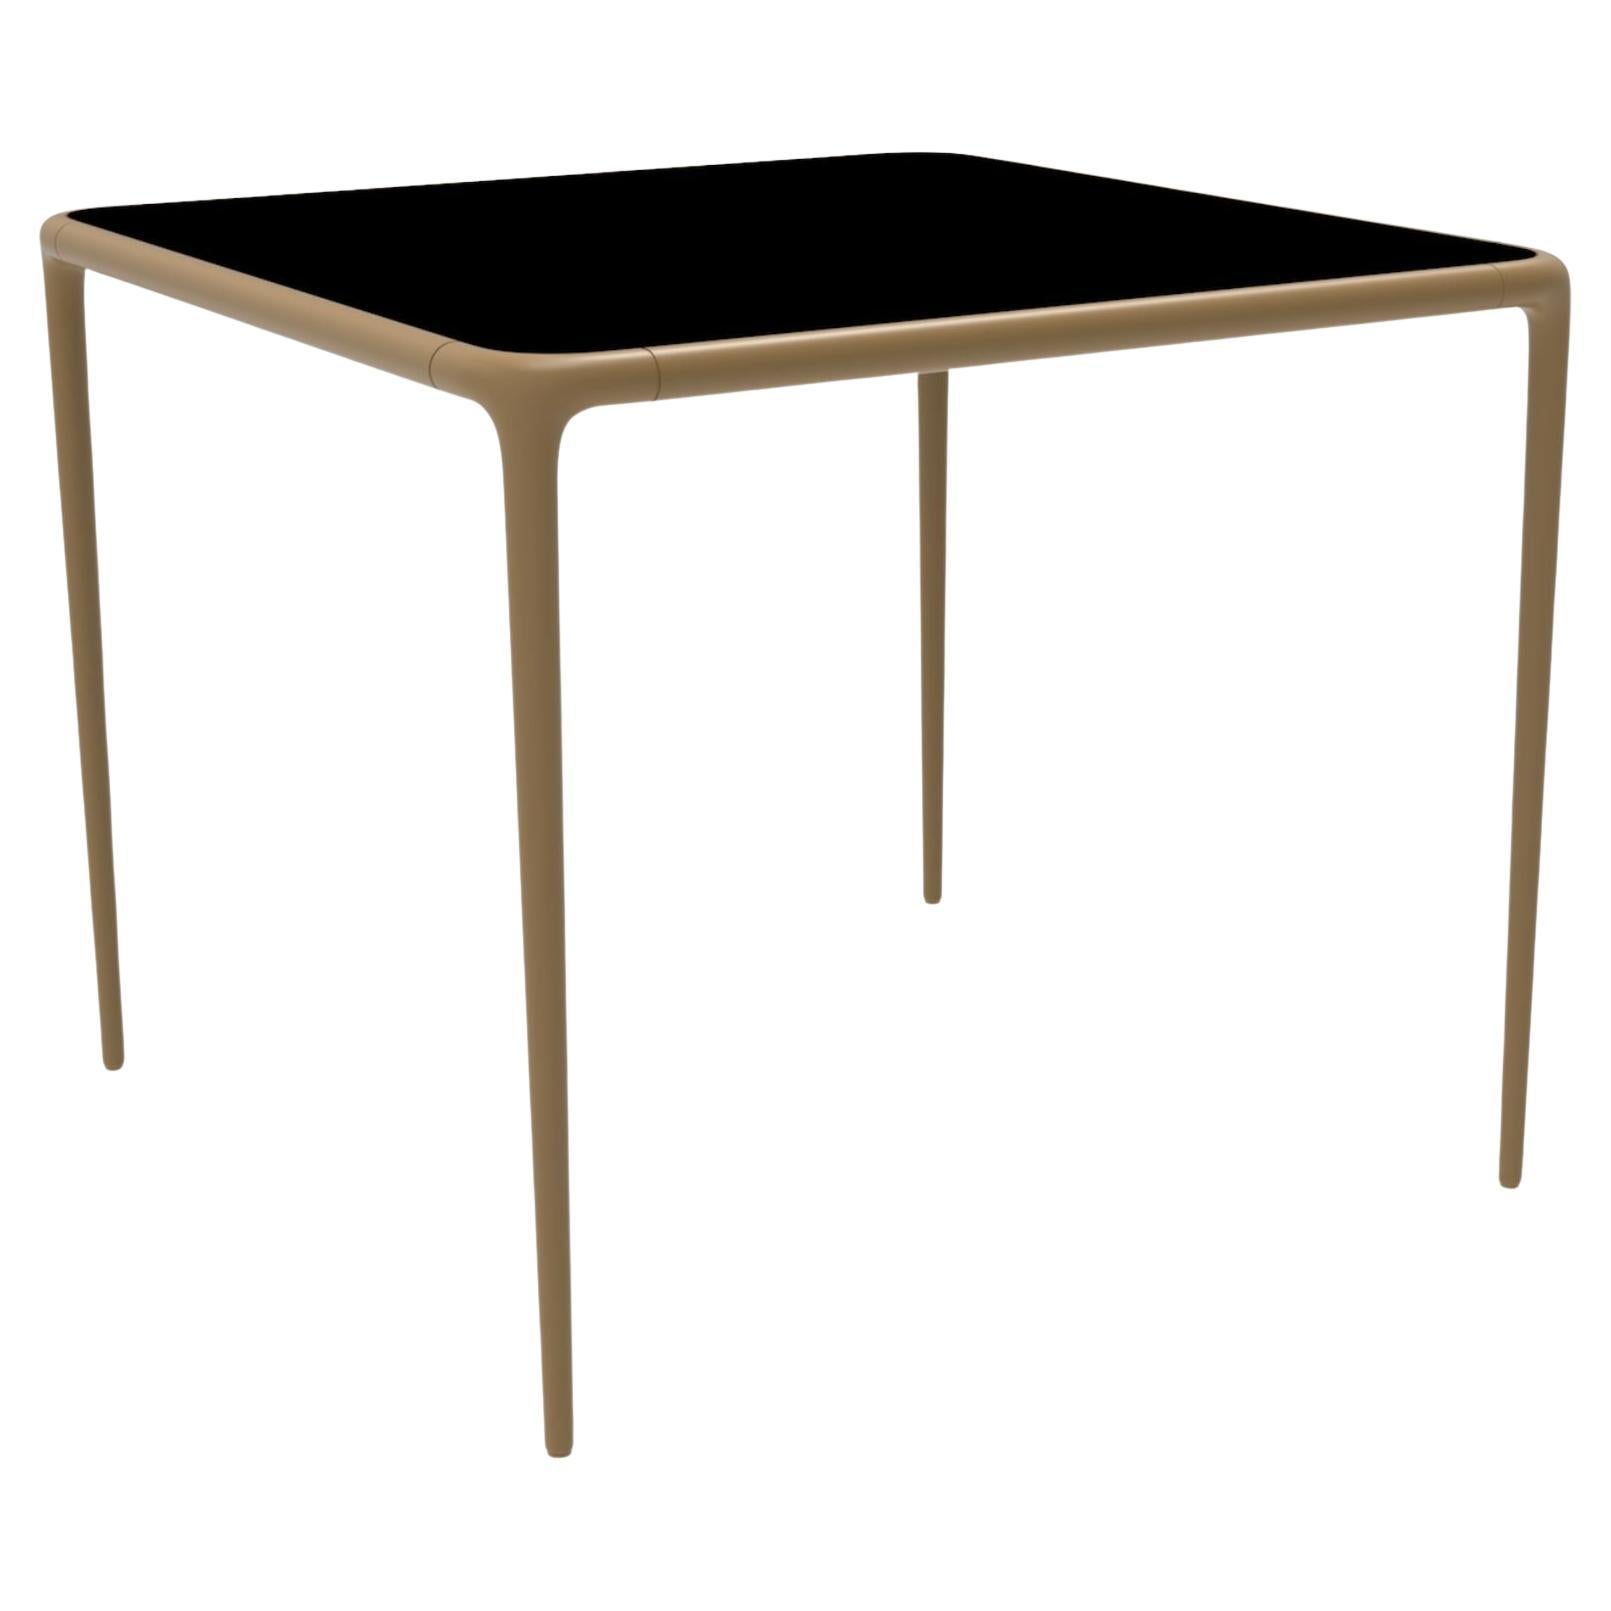 Xaloc Gold Glass Top Table 90 by Mowee